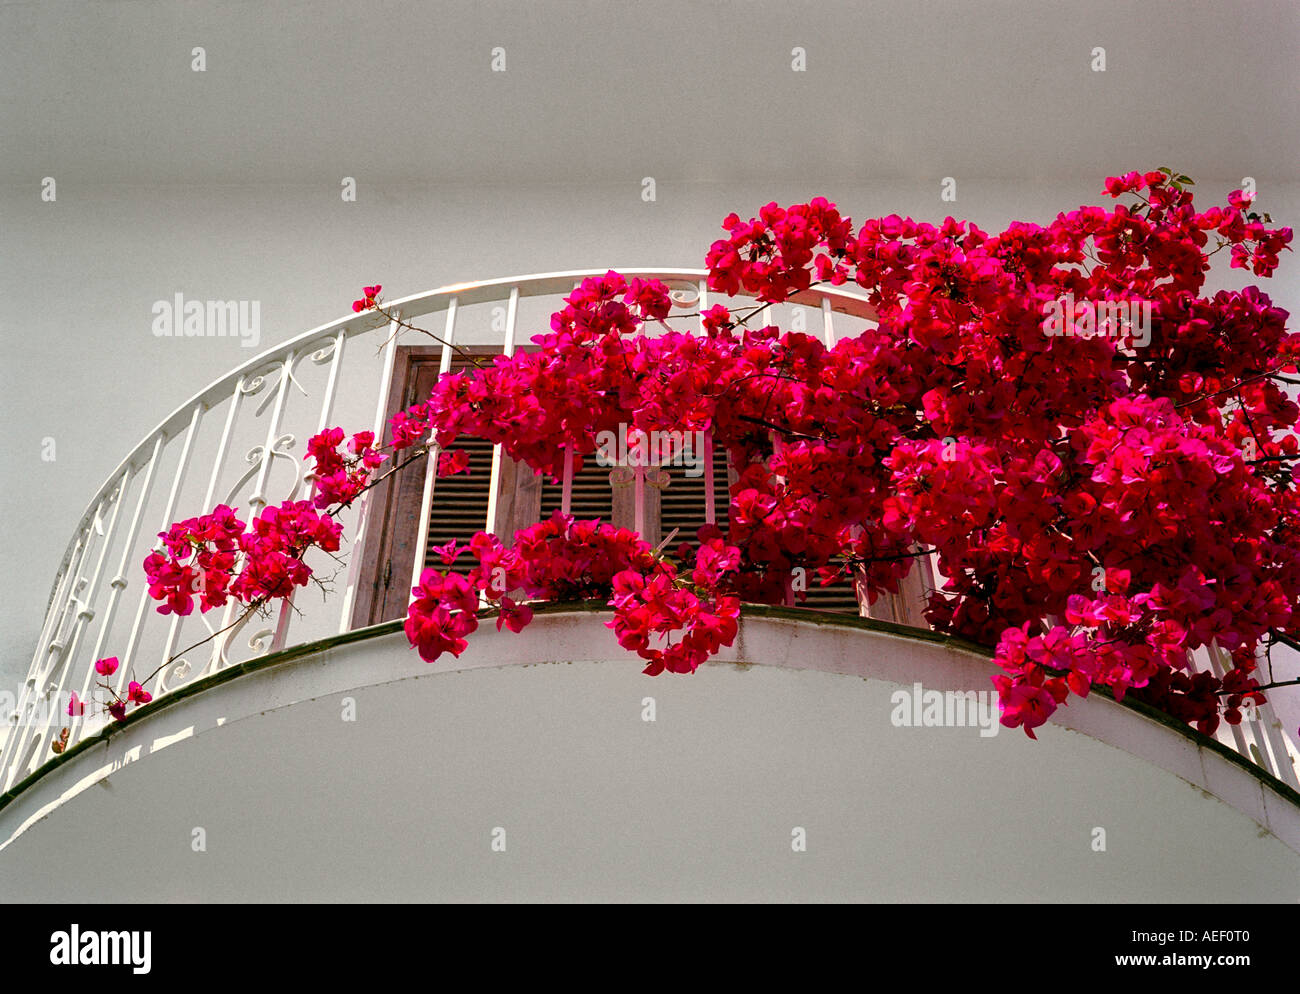 A Startling Array Of Red Bougainvillea On The Balcony Of Andalusian Stock Photo Alamy